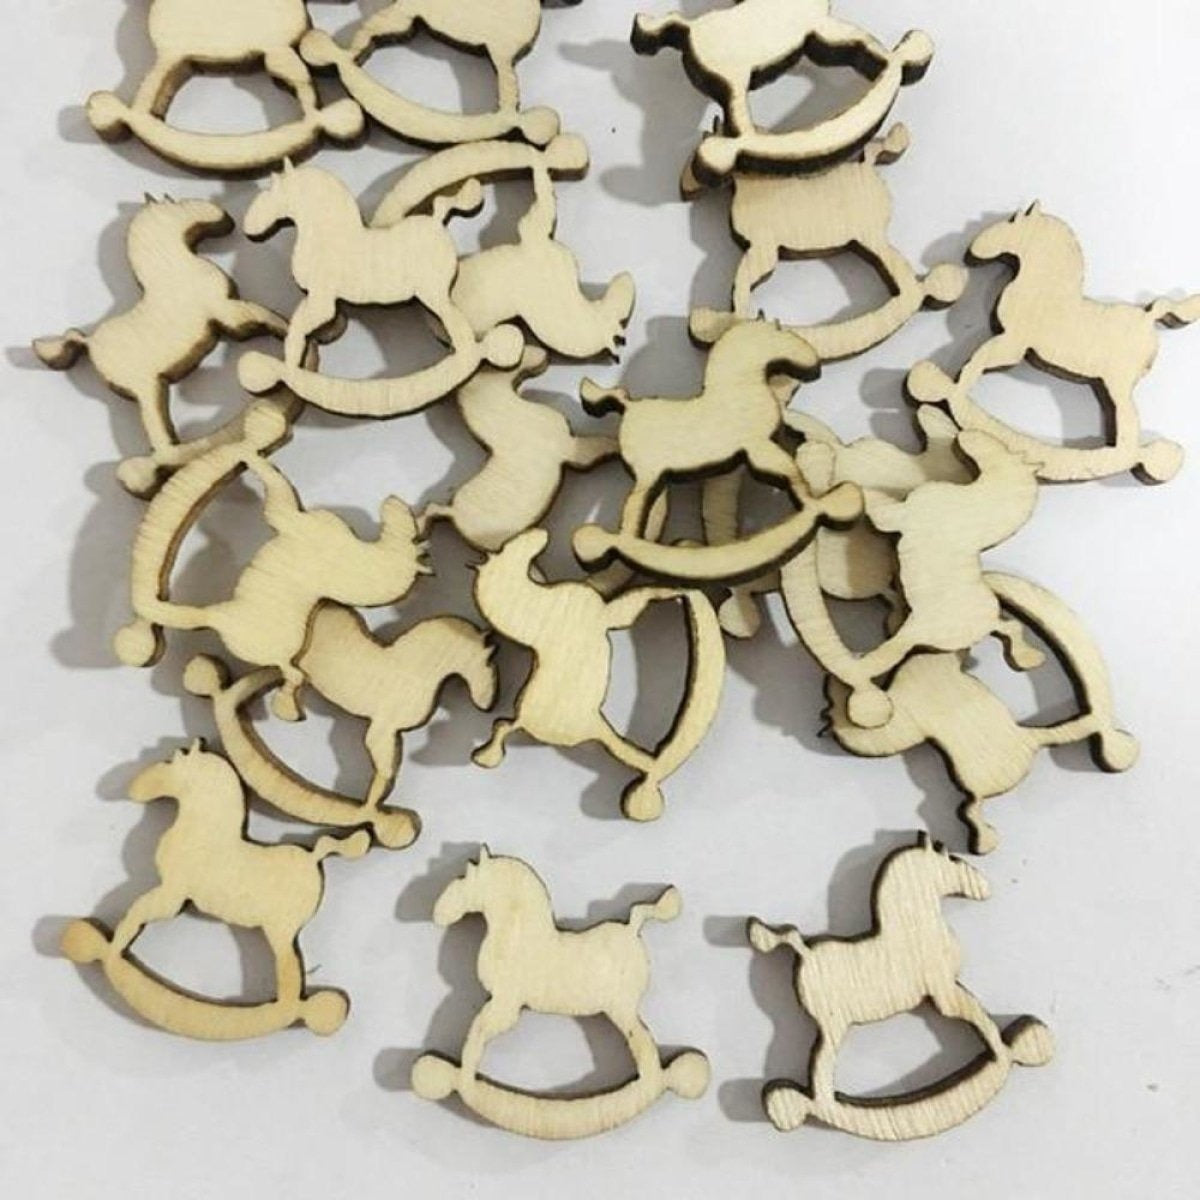 50Pcs Rocking Horse 19Mm Natural Wood Craft Christmas Pendant Hanging Ornament New Year Decor Home